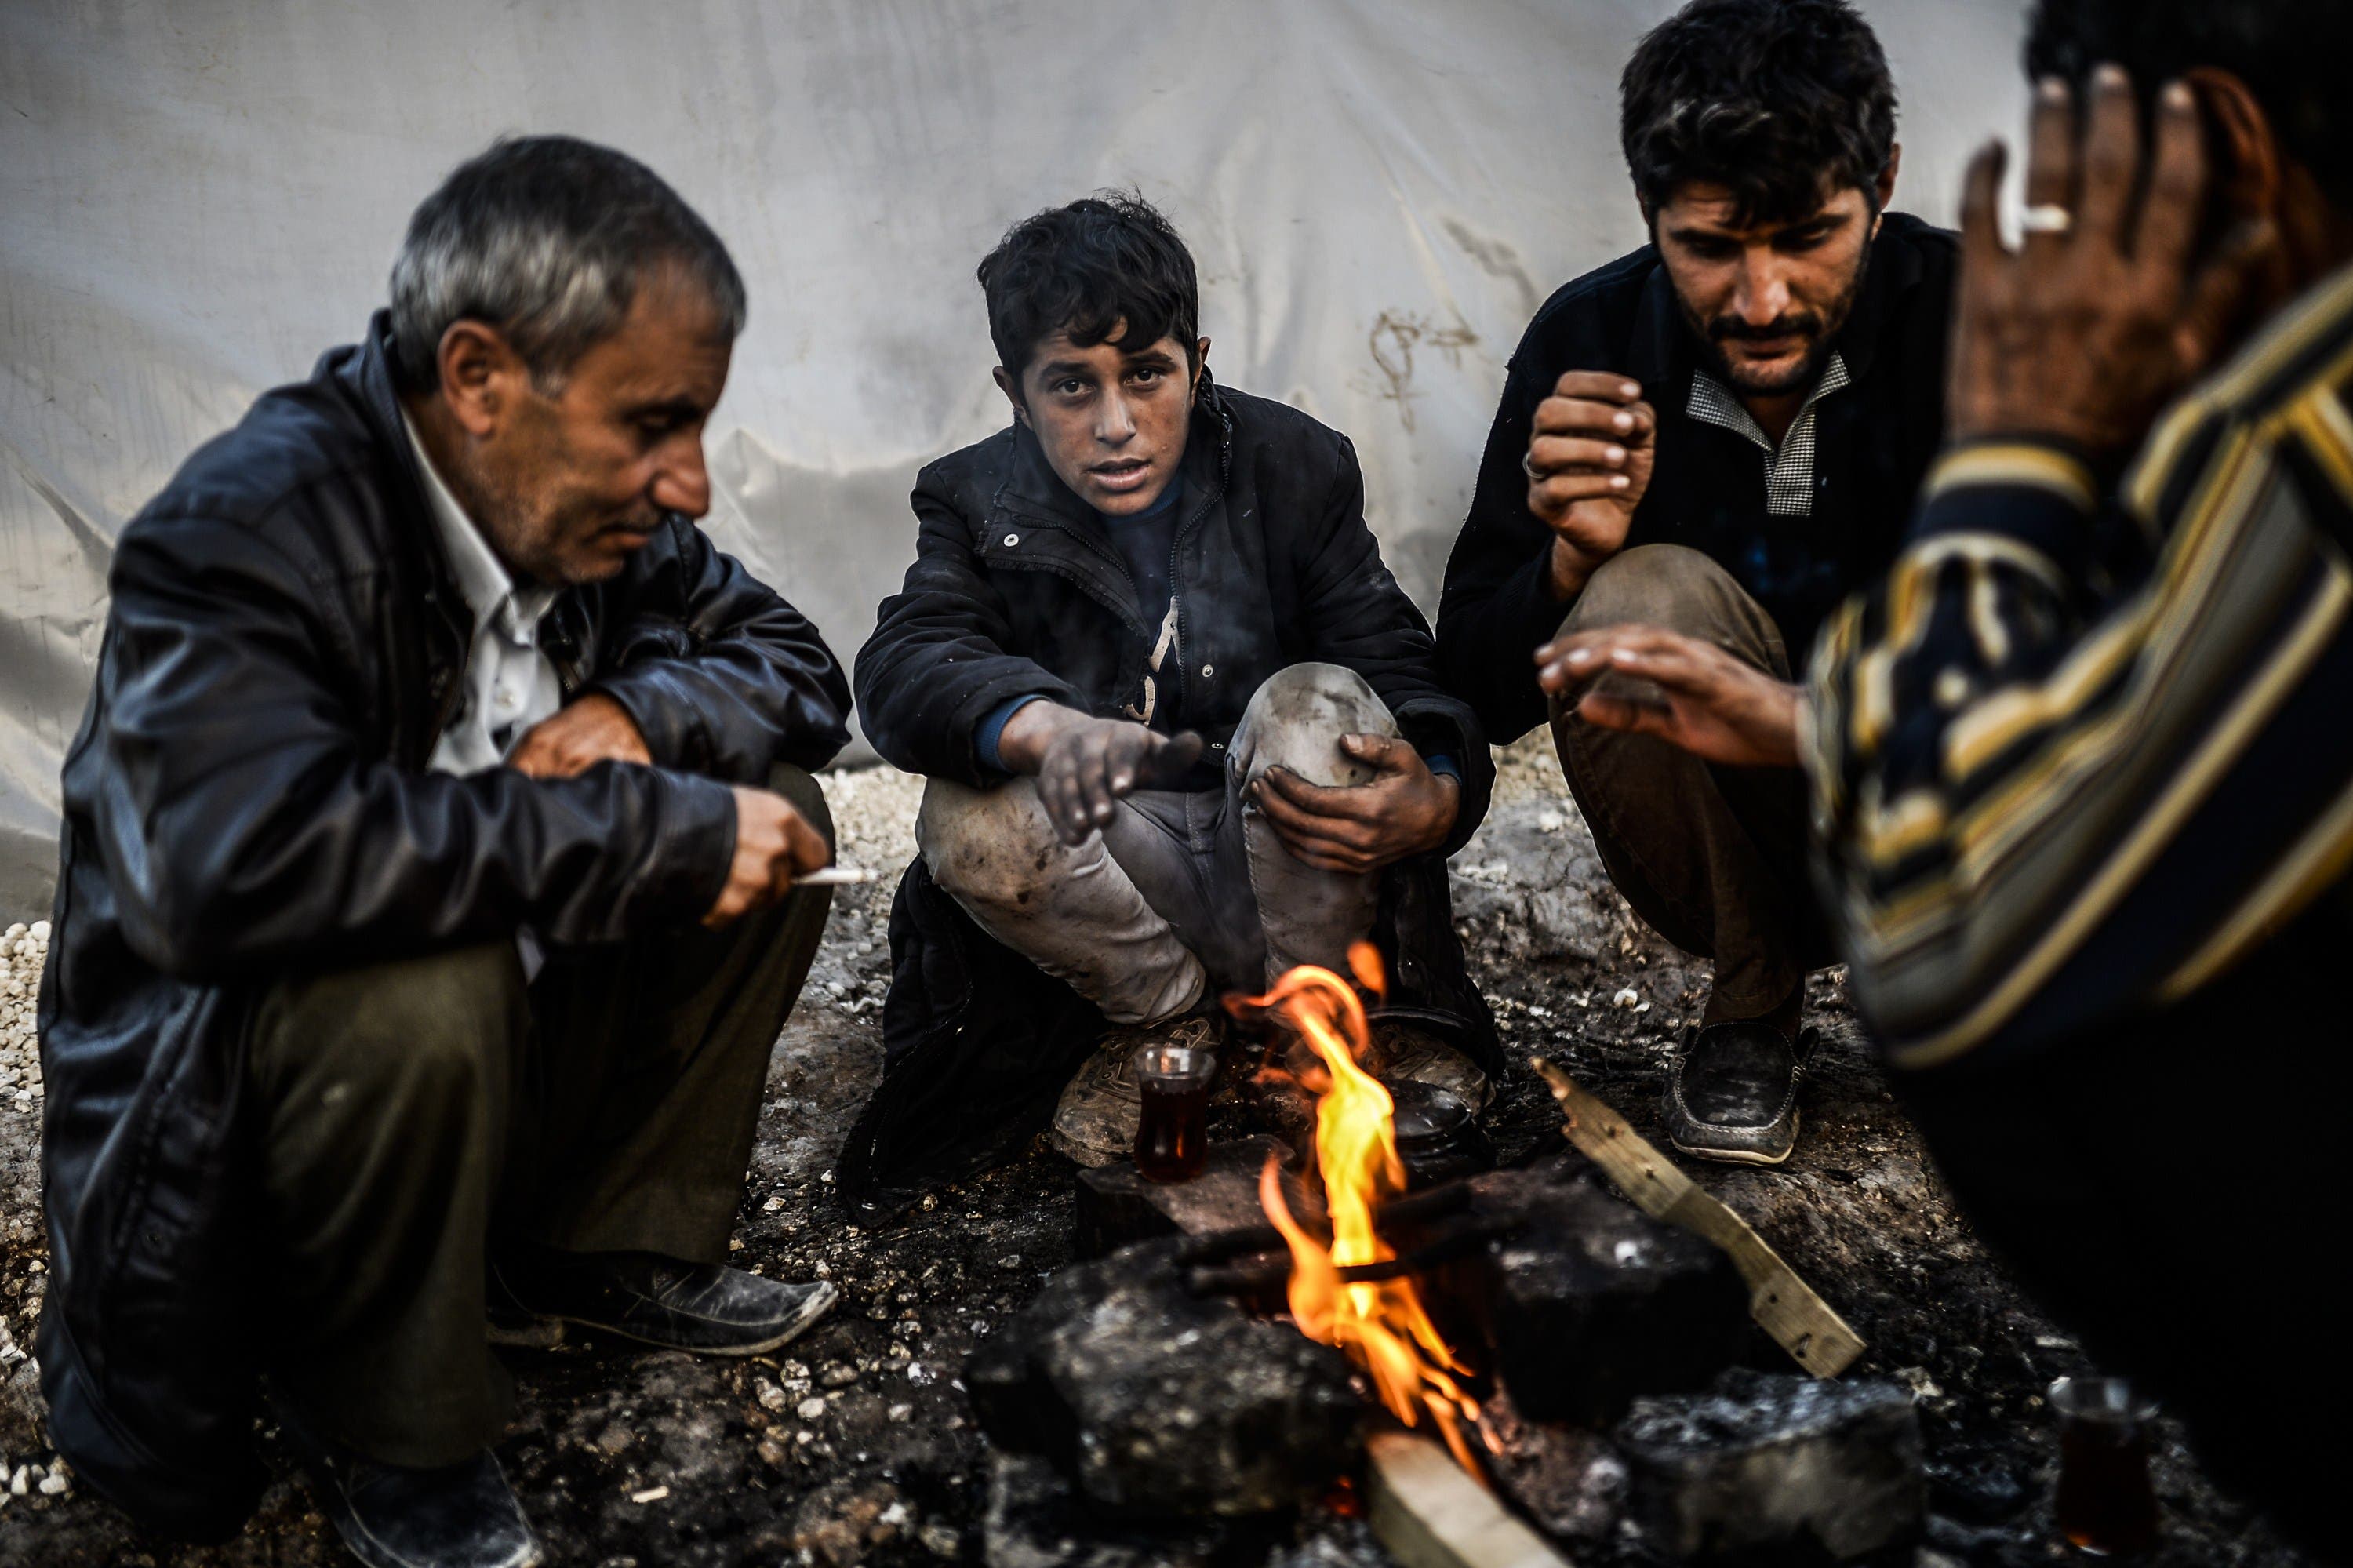 Kobane refugees on the run from ISIS